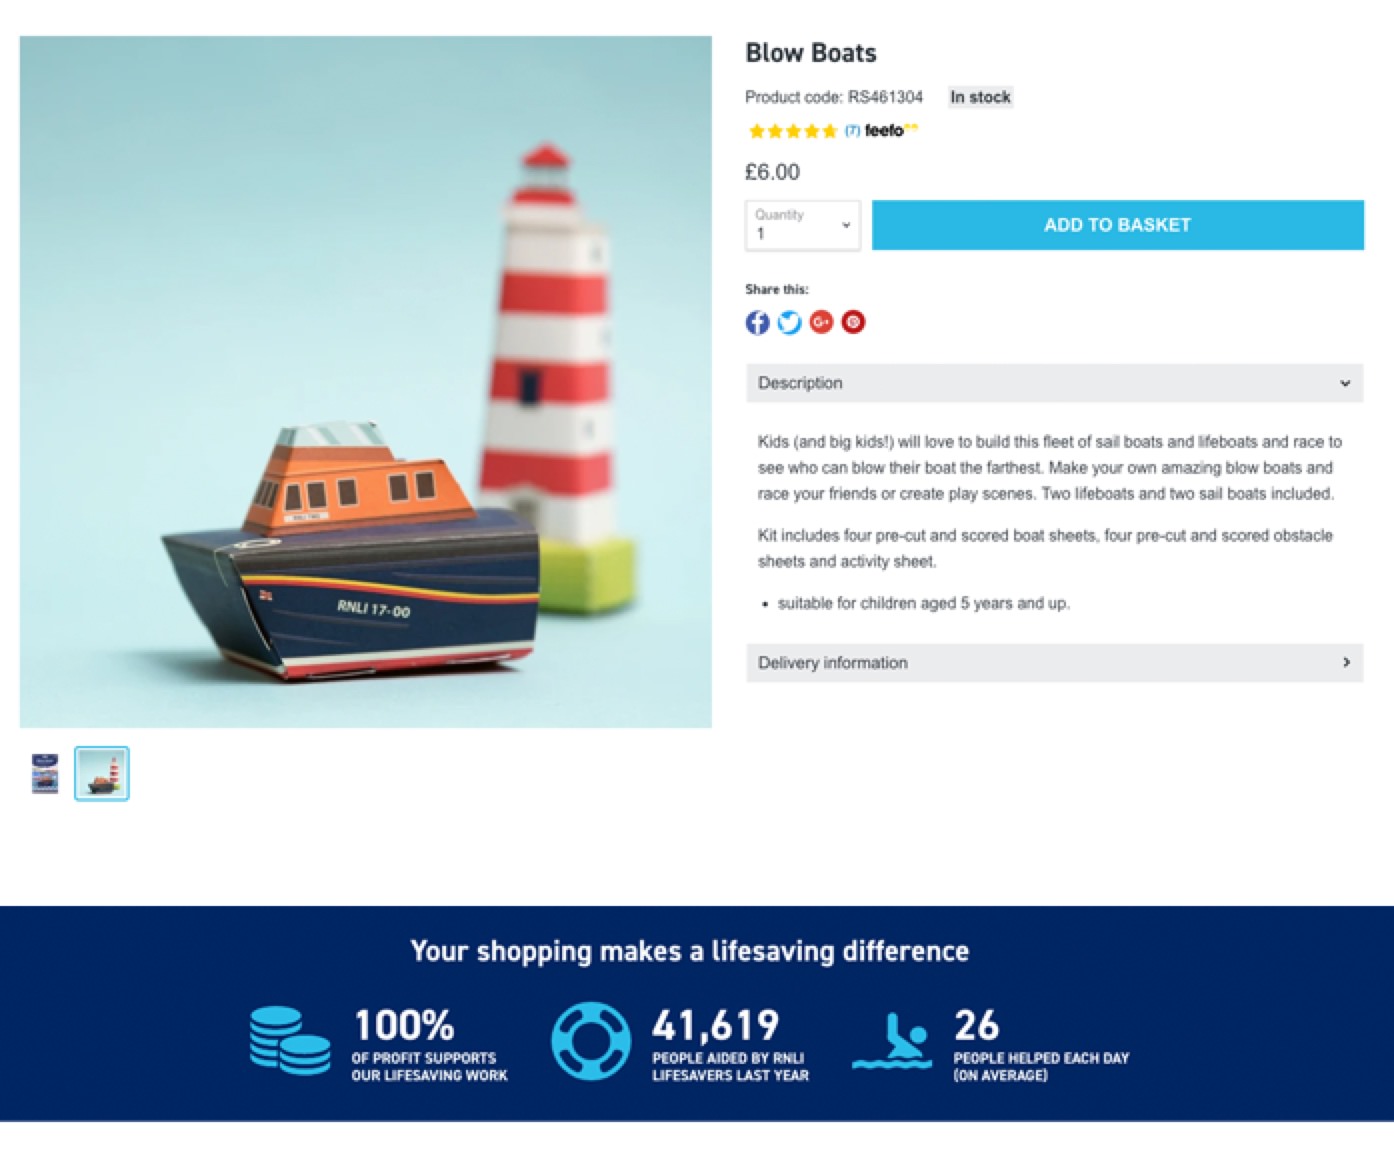 RNLI product page of a Blow Boat